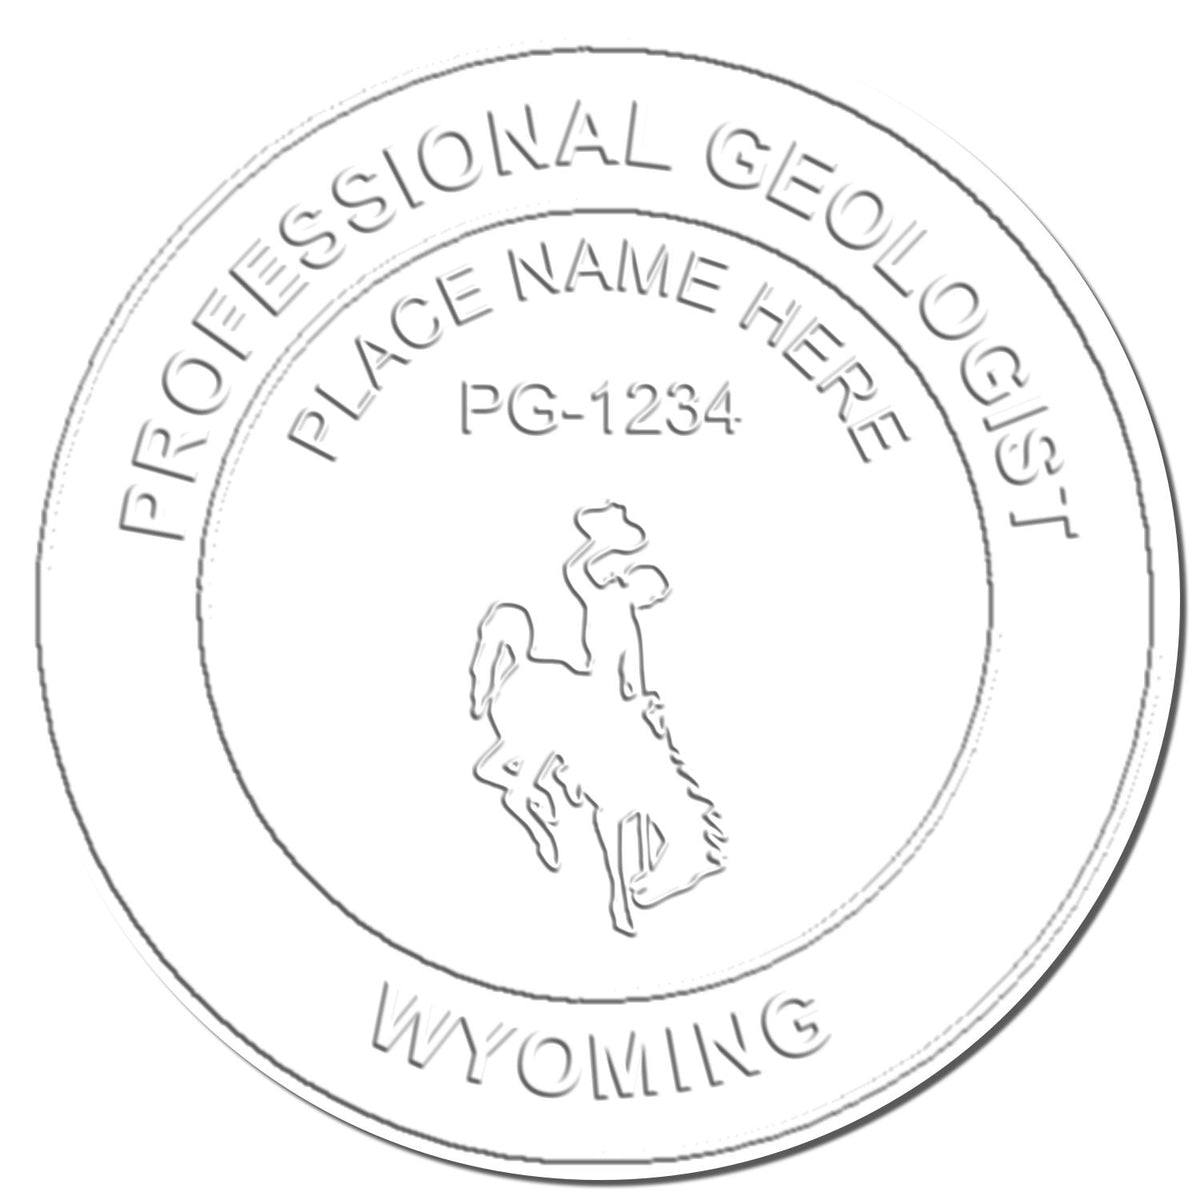 A photograph of the Hybrid Wyoming Geologist Seal stamp impression reveals a vivid, professional image of the on paper.